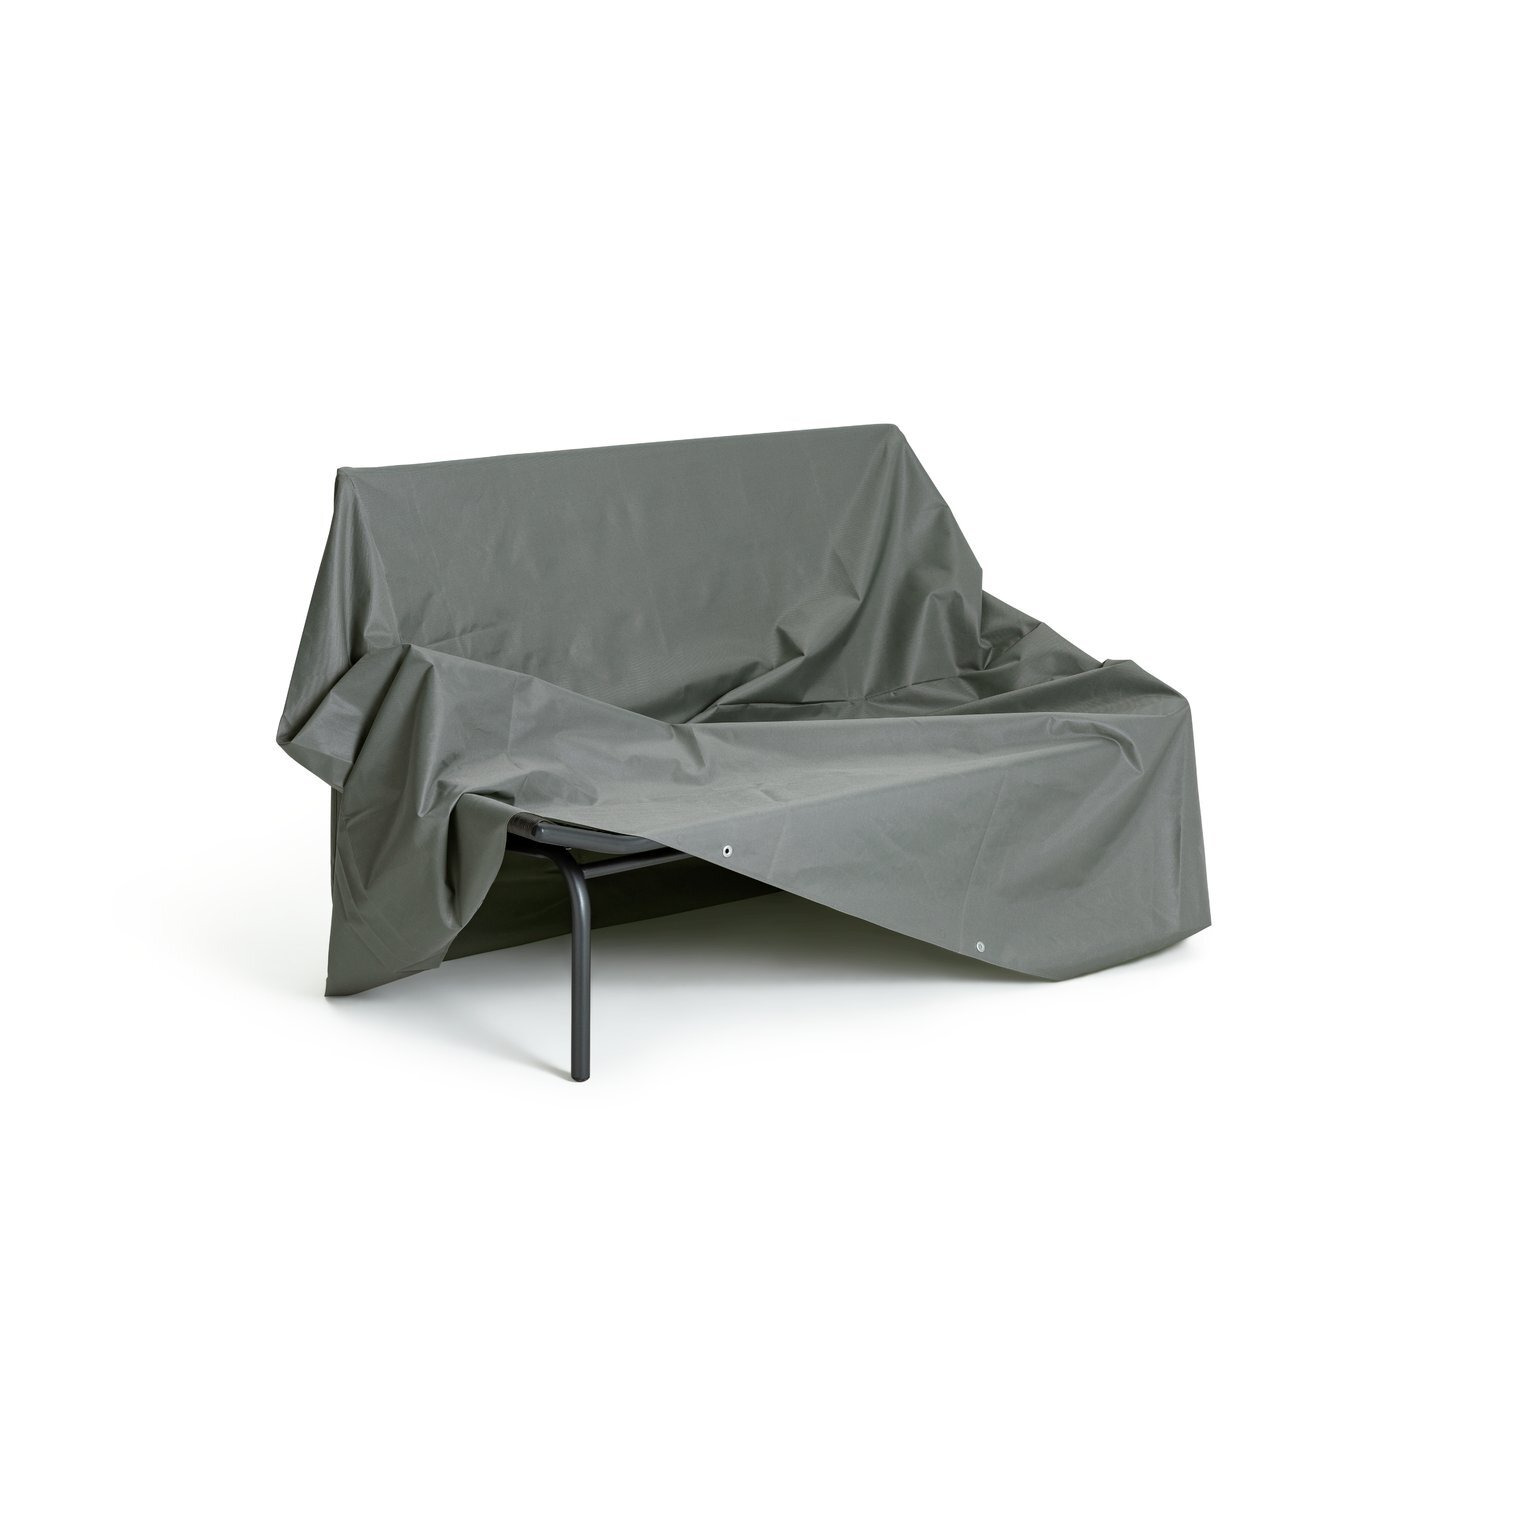 Argos Home Deluxe Bench Cover - image 1